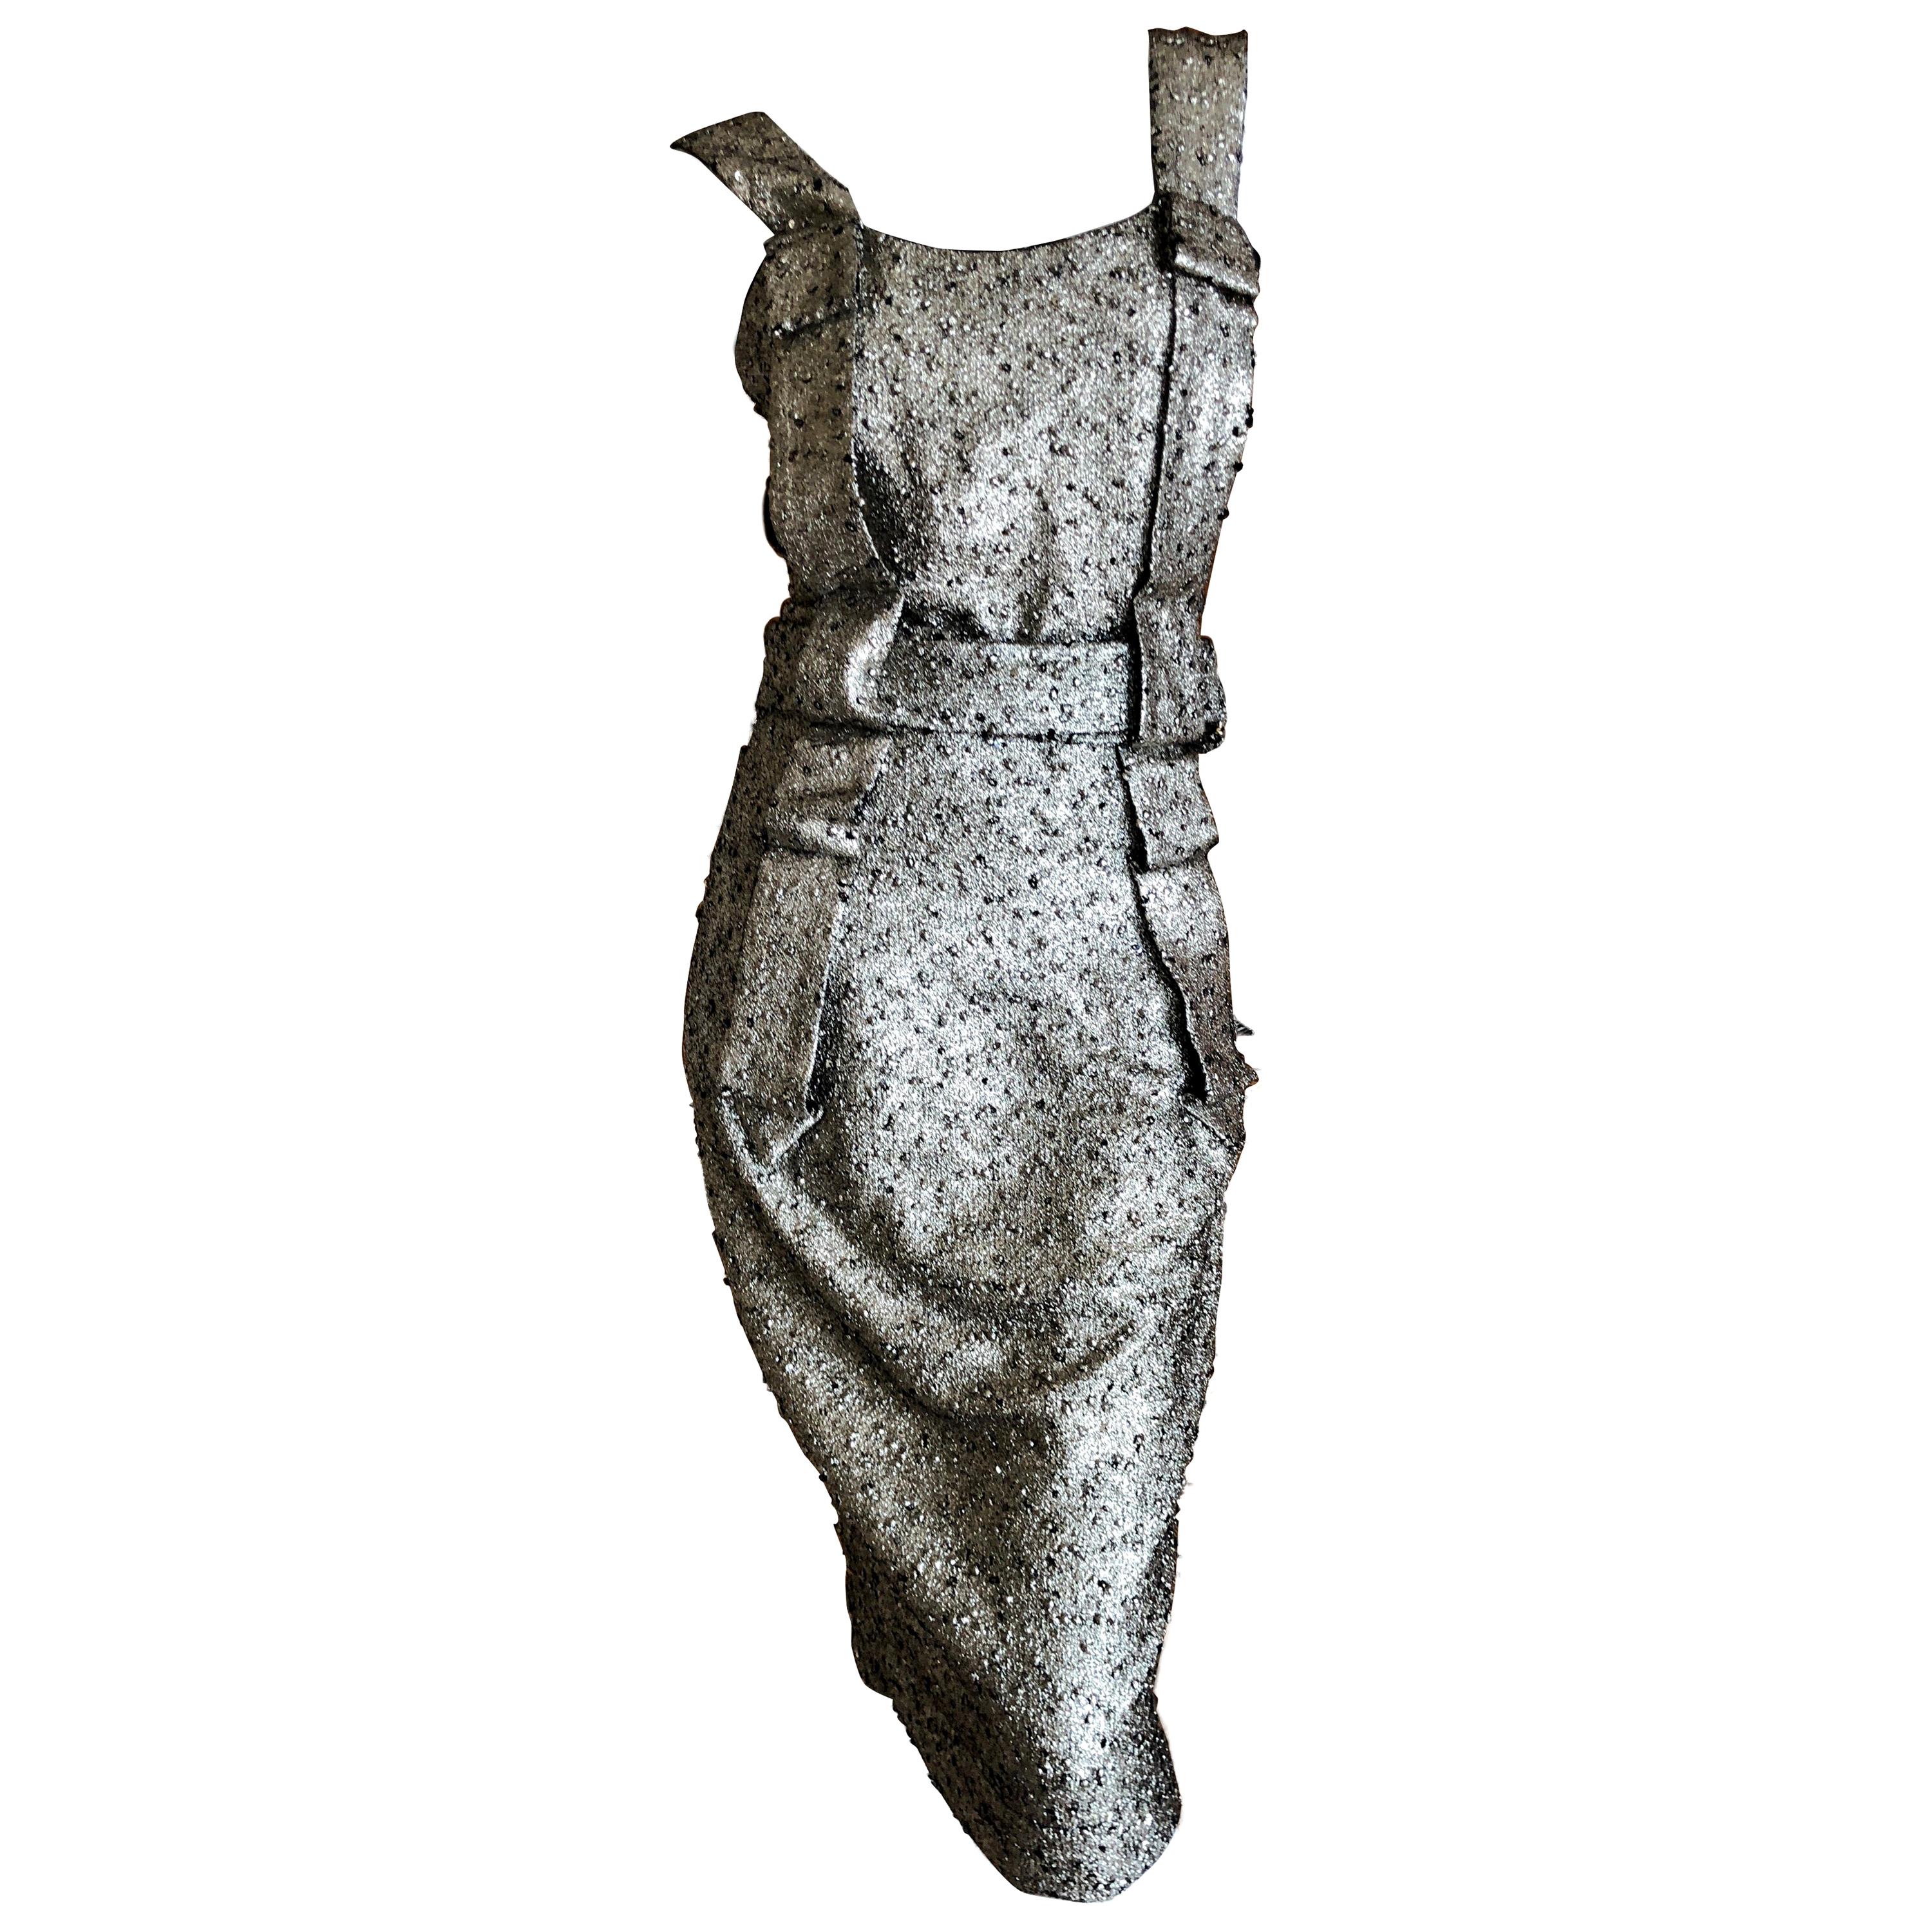 Vivienne Westwood Anglomania 2011 Glittery Silver Cocktail Dress 